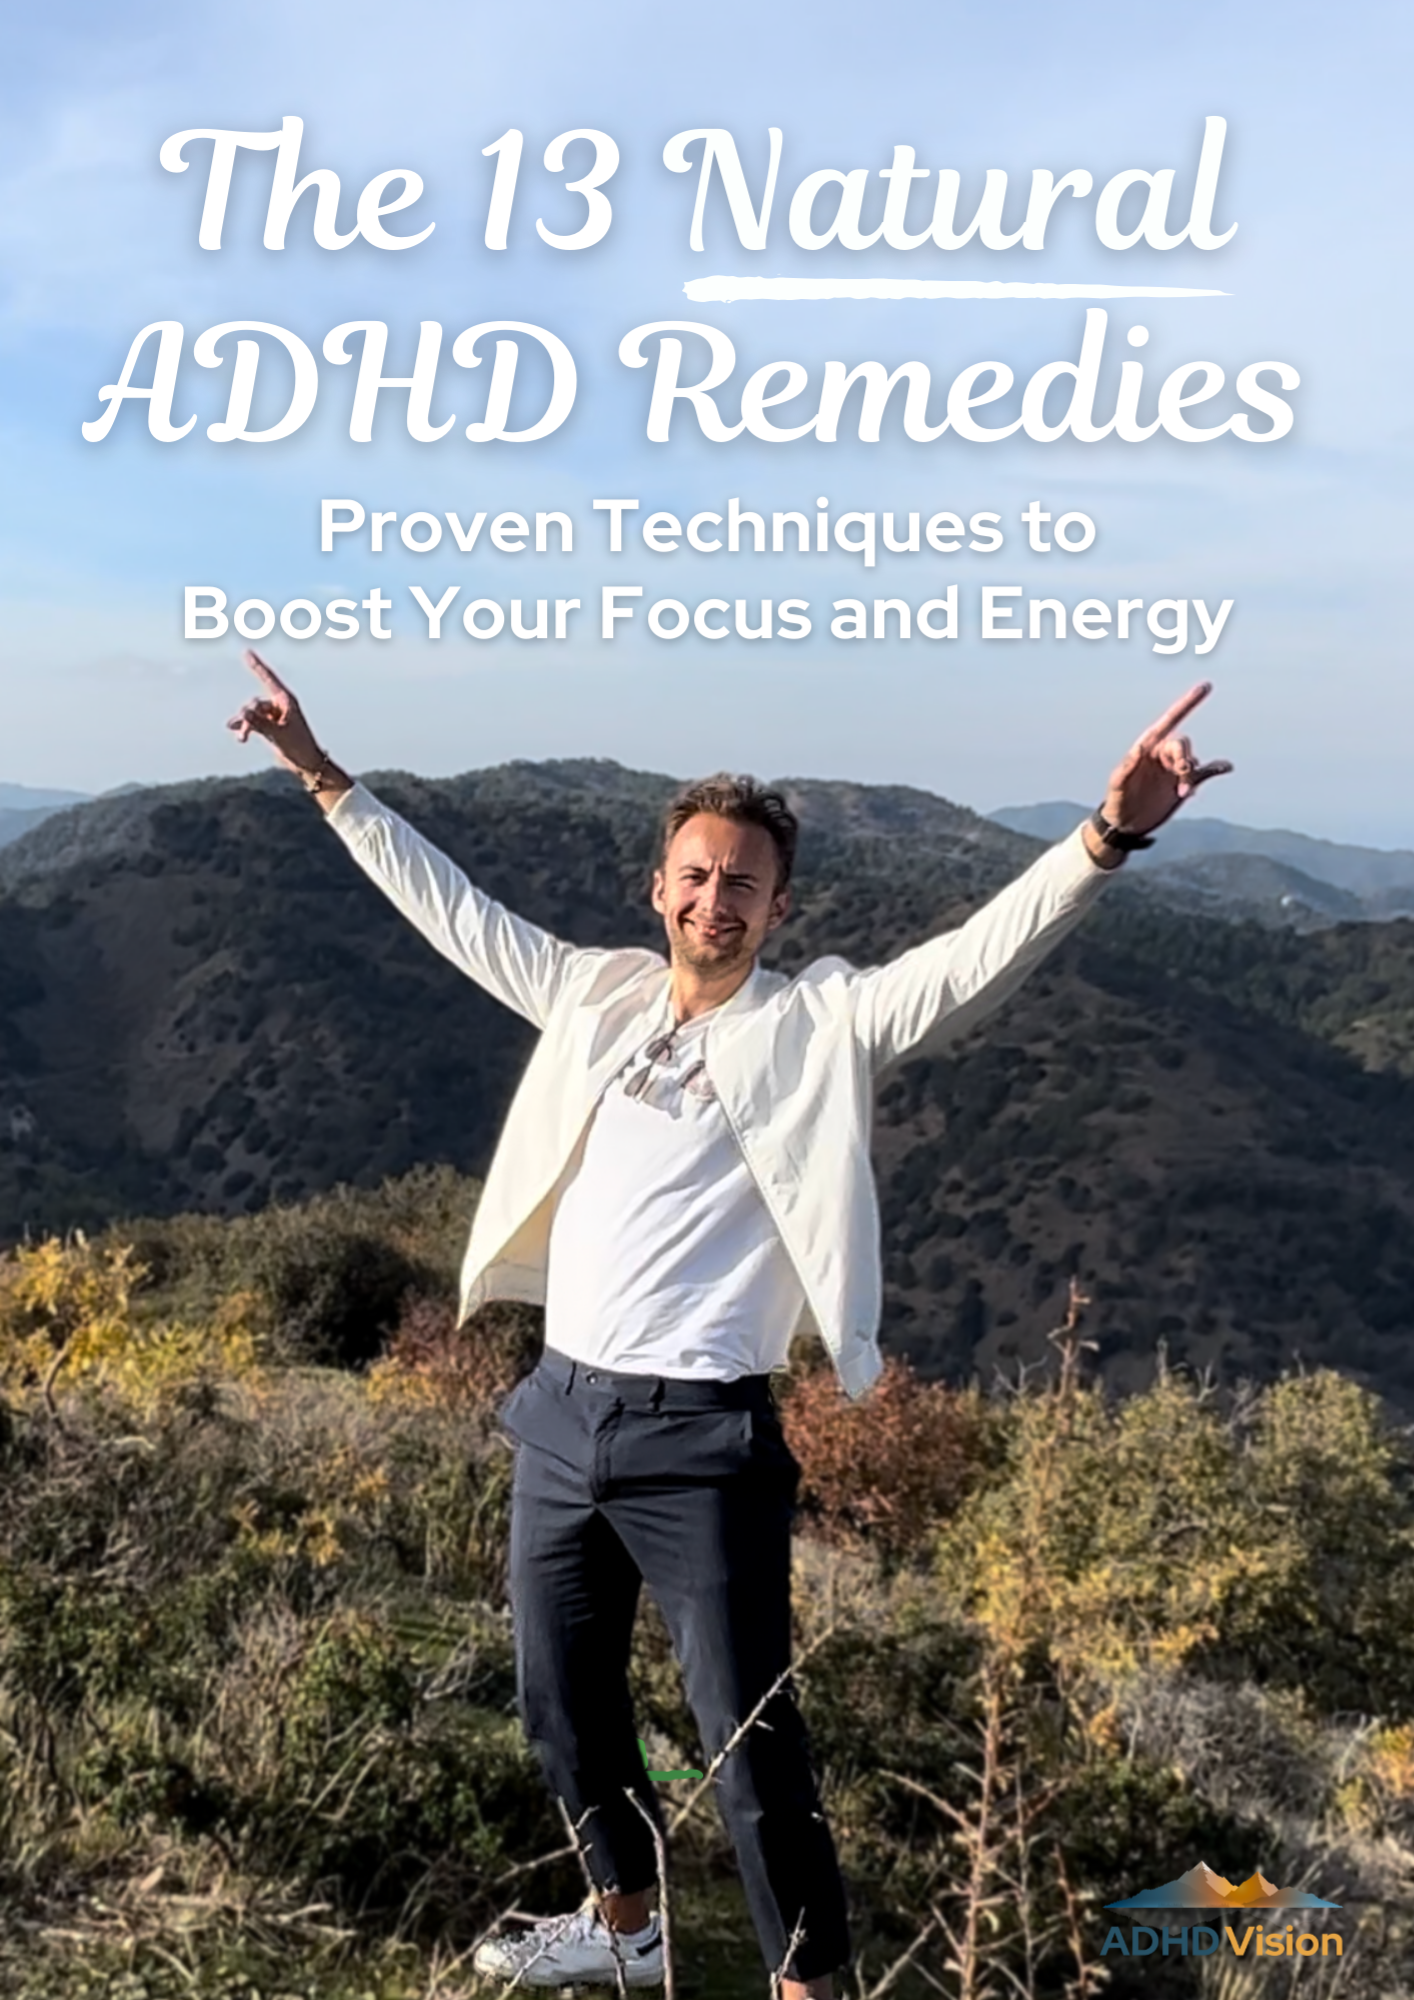 The 13 Natural ADHD Remedies Toolkit